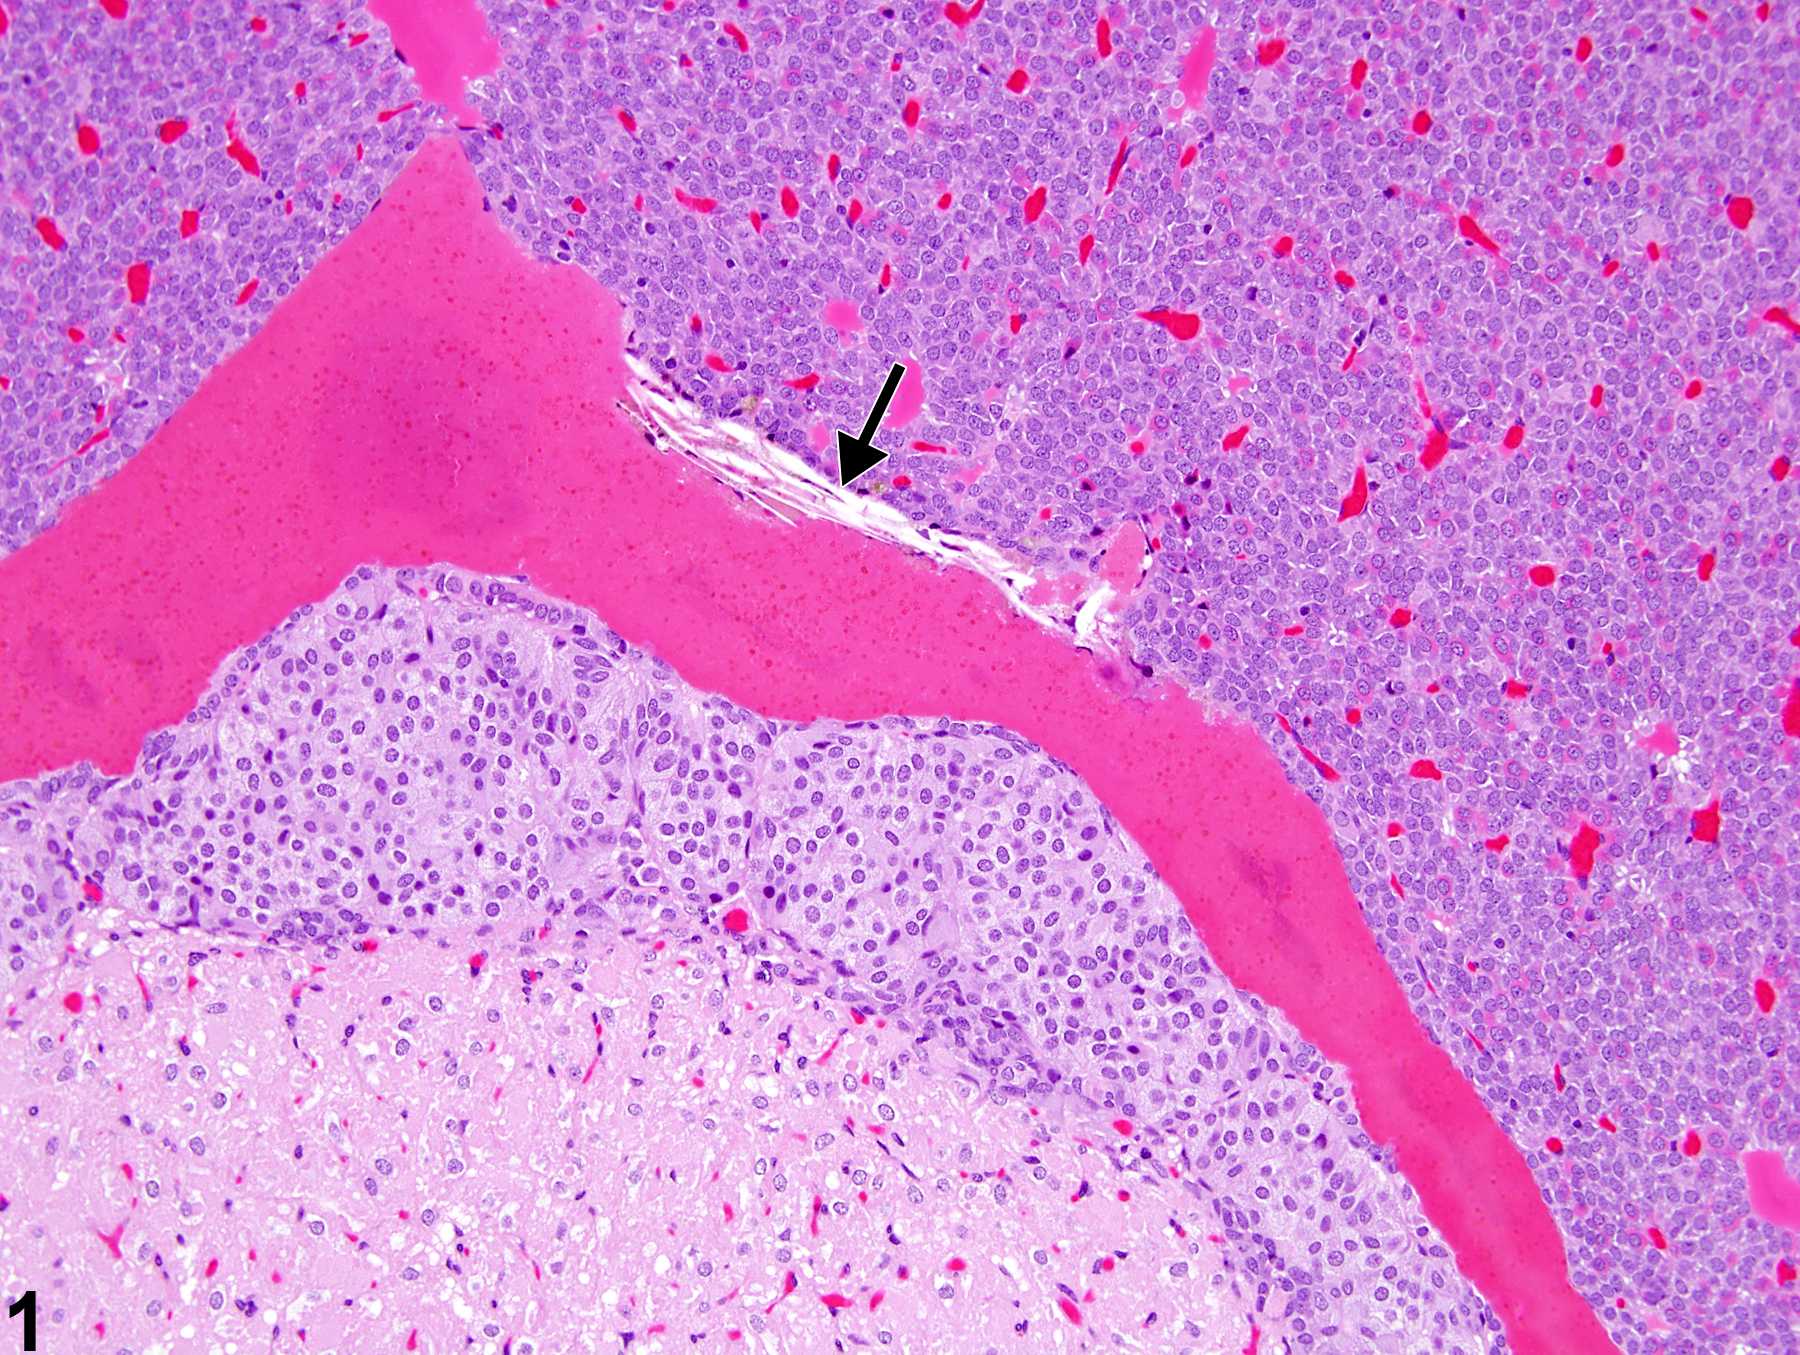 Image of Rathke's cleft dilation in the pituitary gland from a female F344/N rat in a chronic study